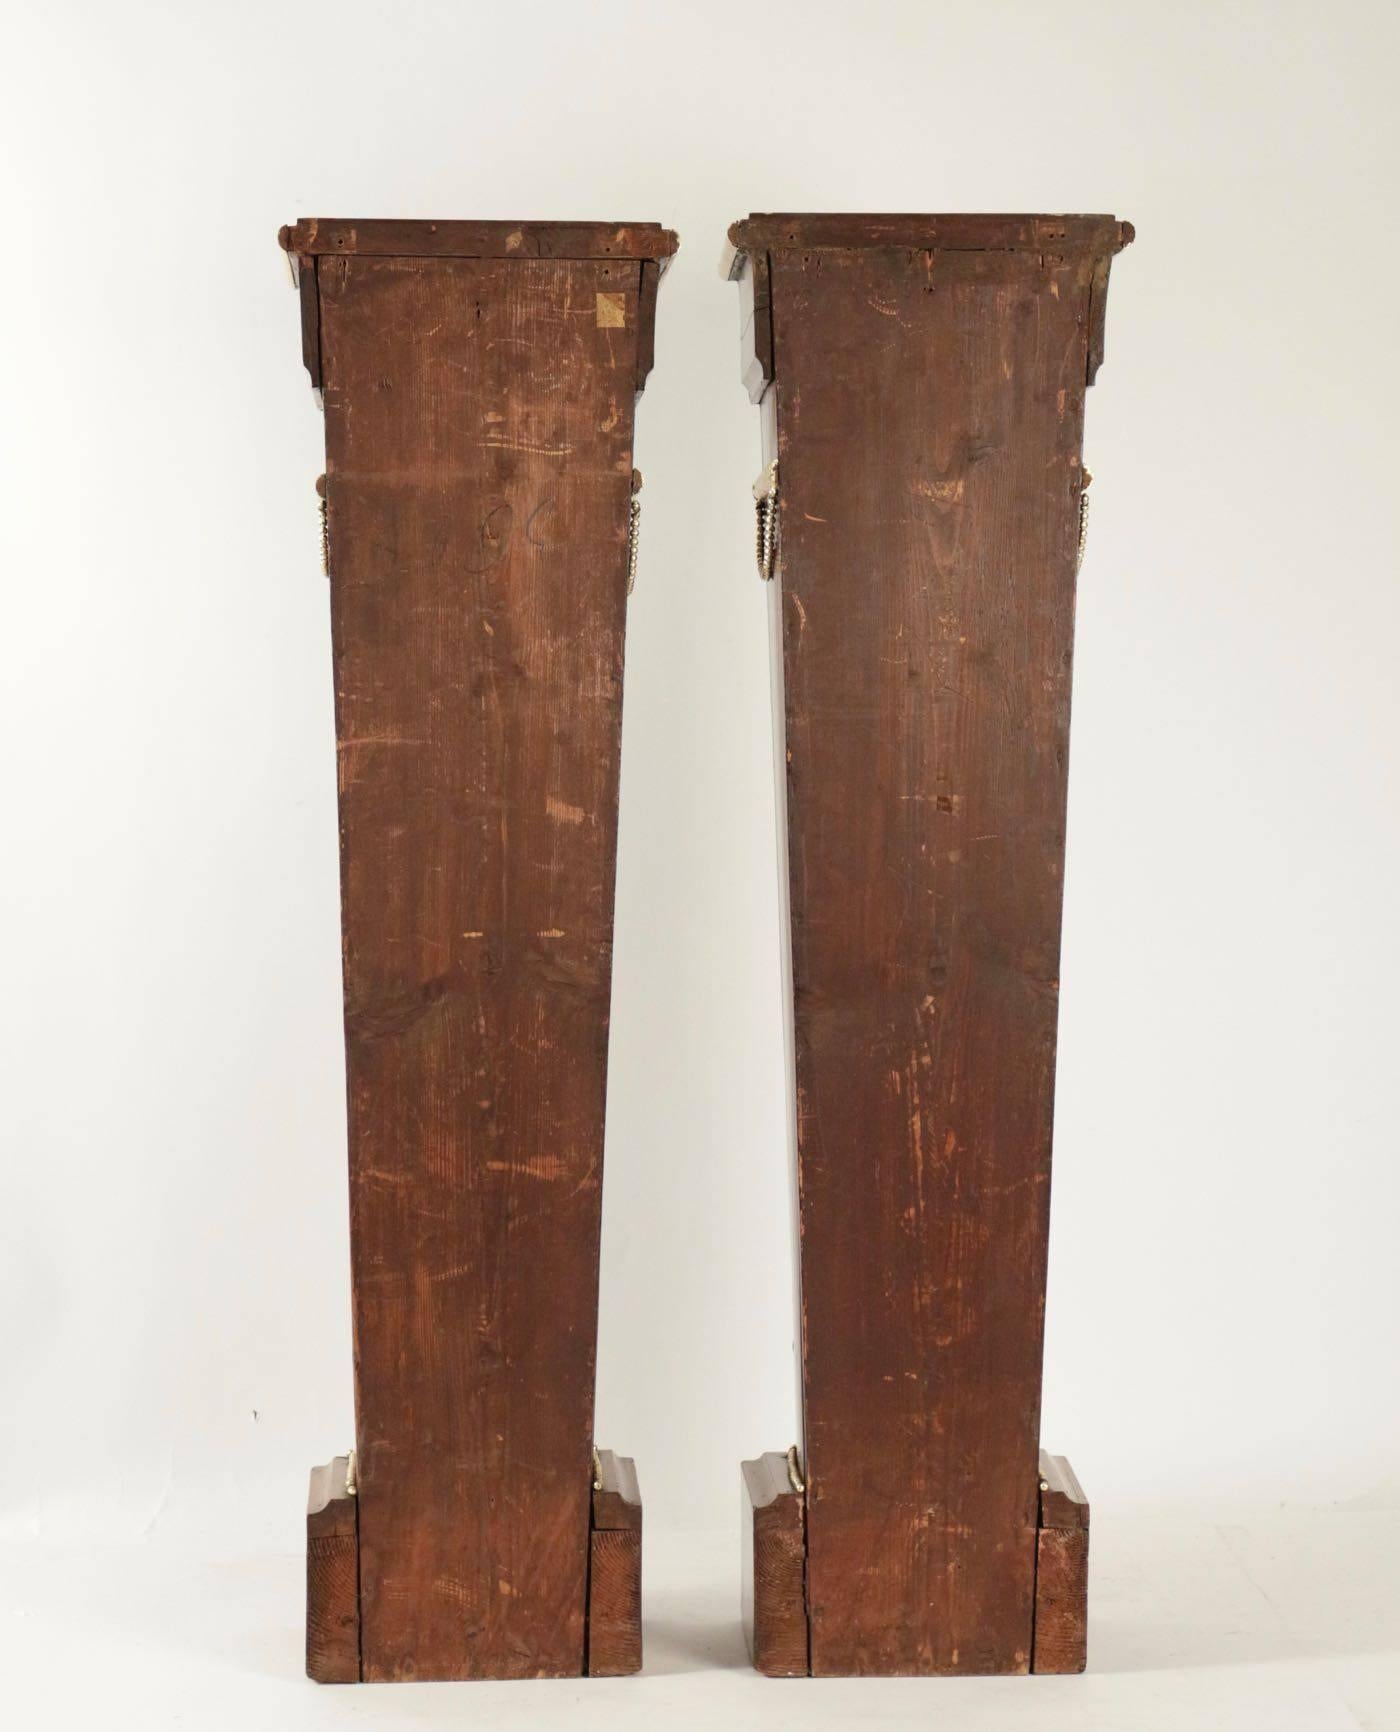 Pair of Sheaths, Consoles, Mahogany, Golden at the Gold Leaf, 19th Century For Sale 2